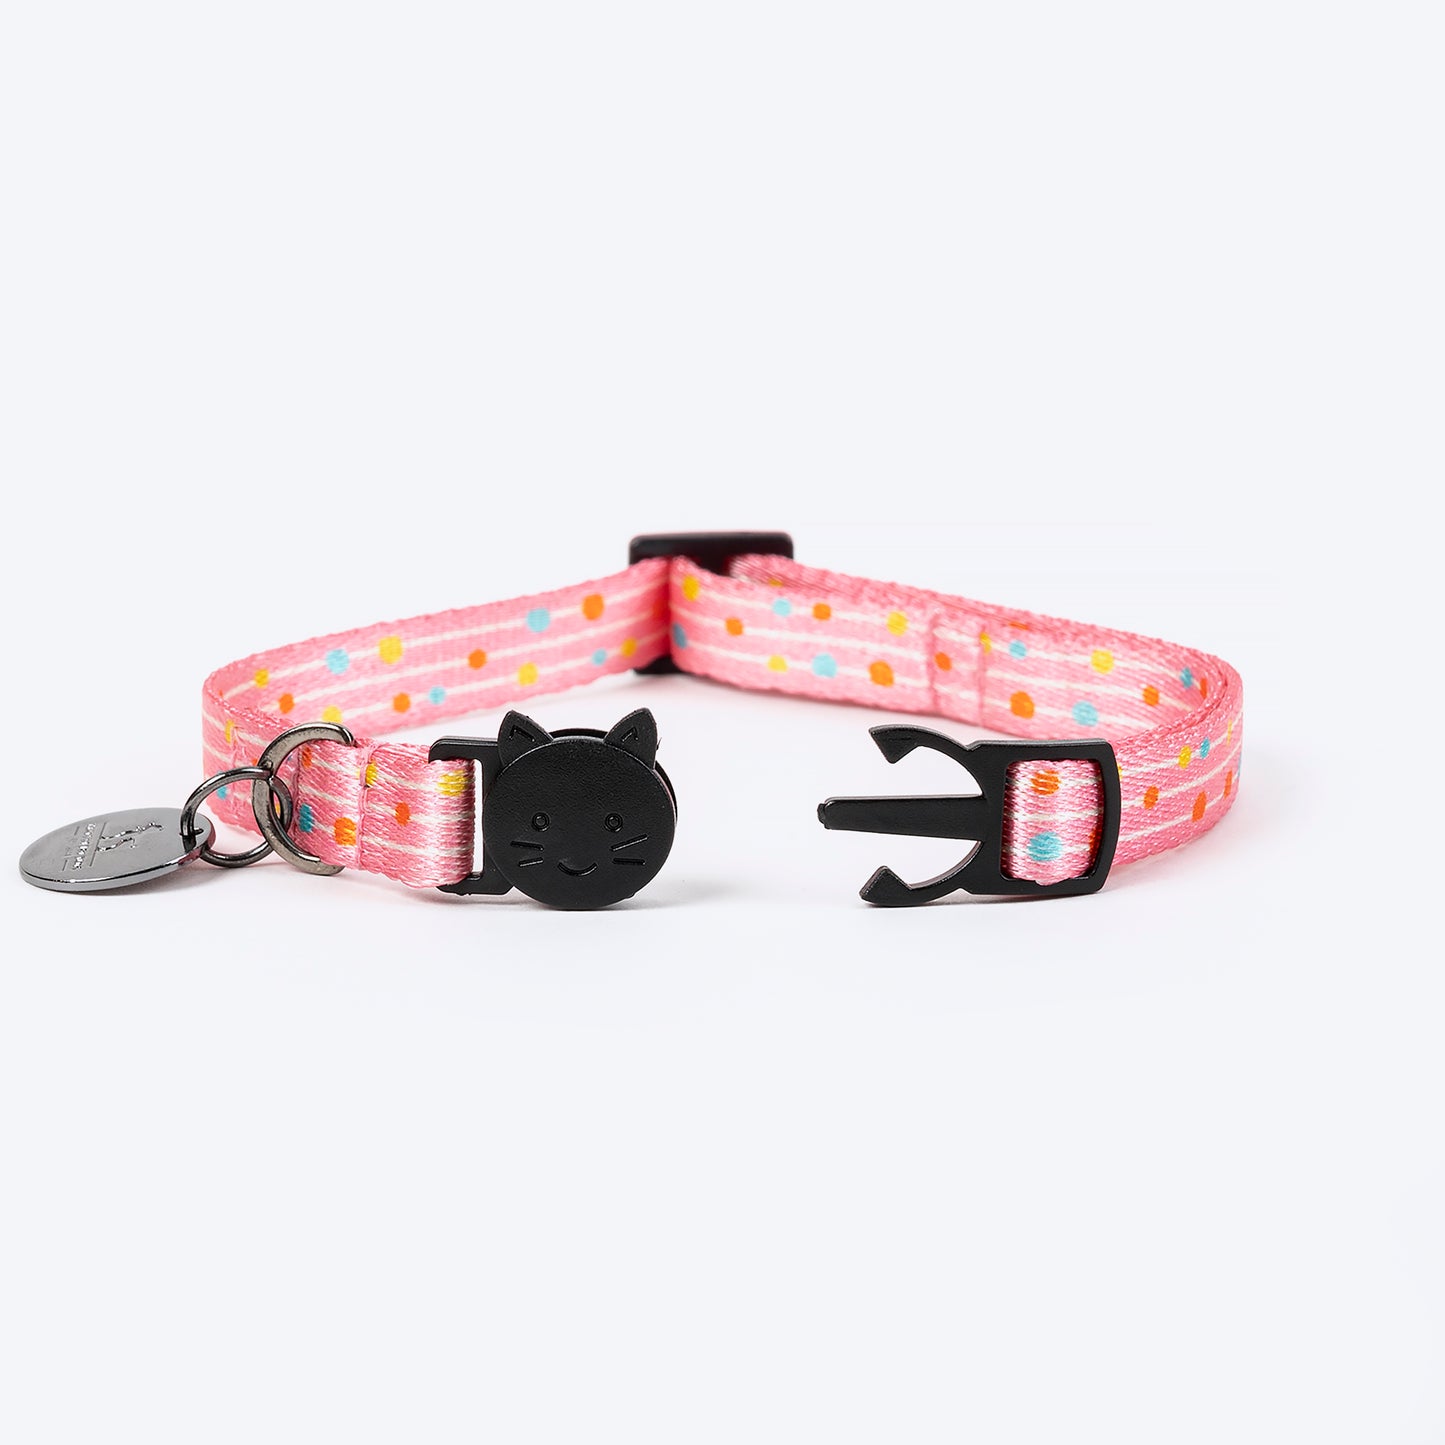 HUFT Meowvelous Cat Collars - Pink & Sea Blue - Heads Up For Tails